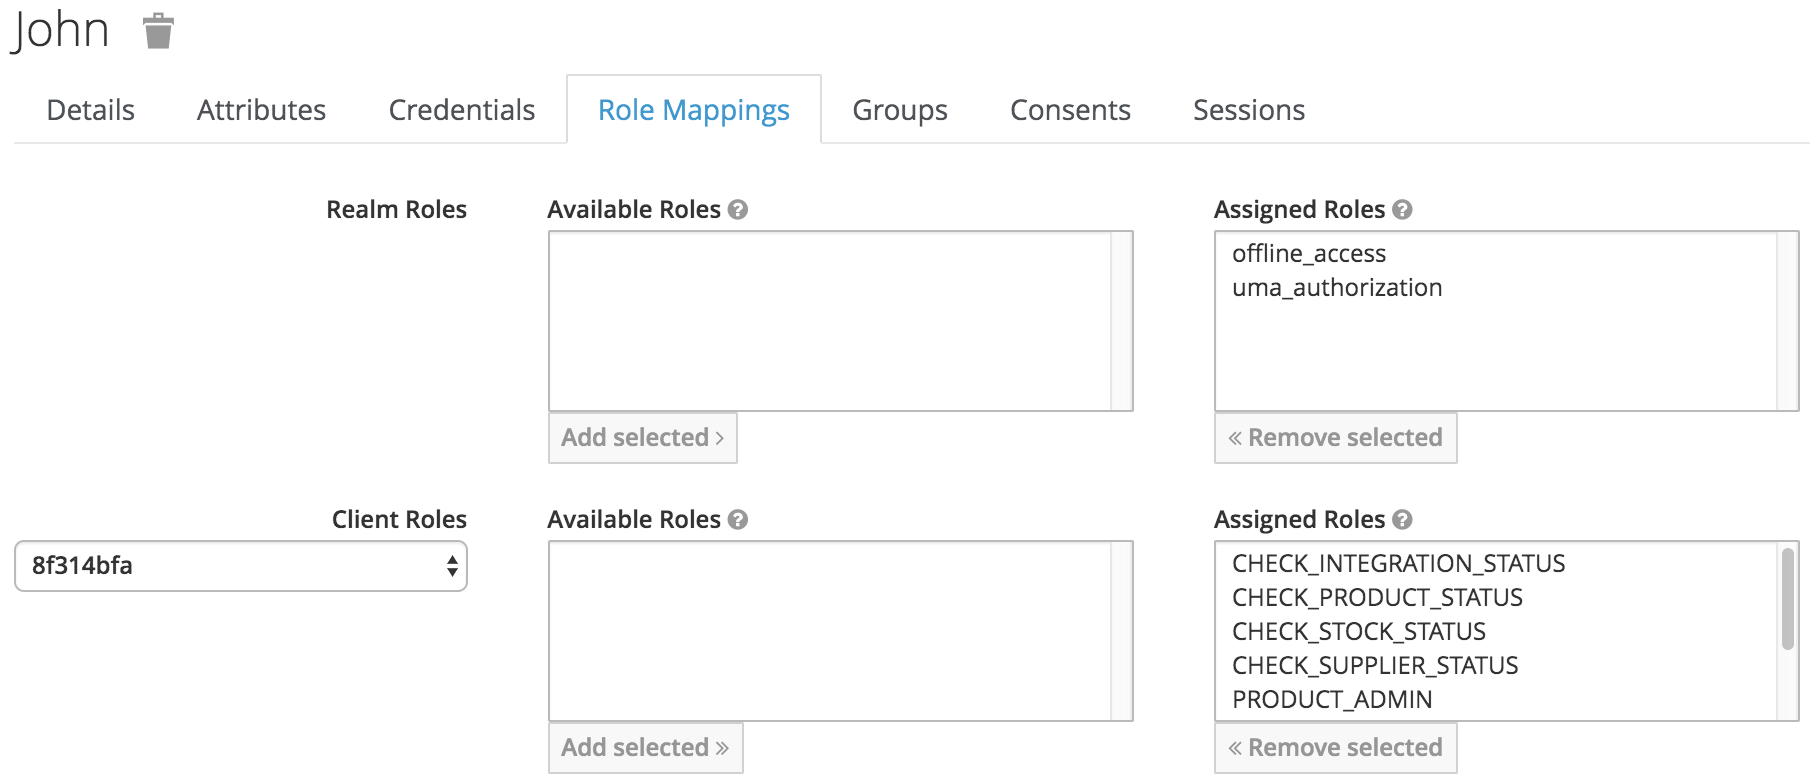 Go to the Role Mappings tab and Assign all roles to the user